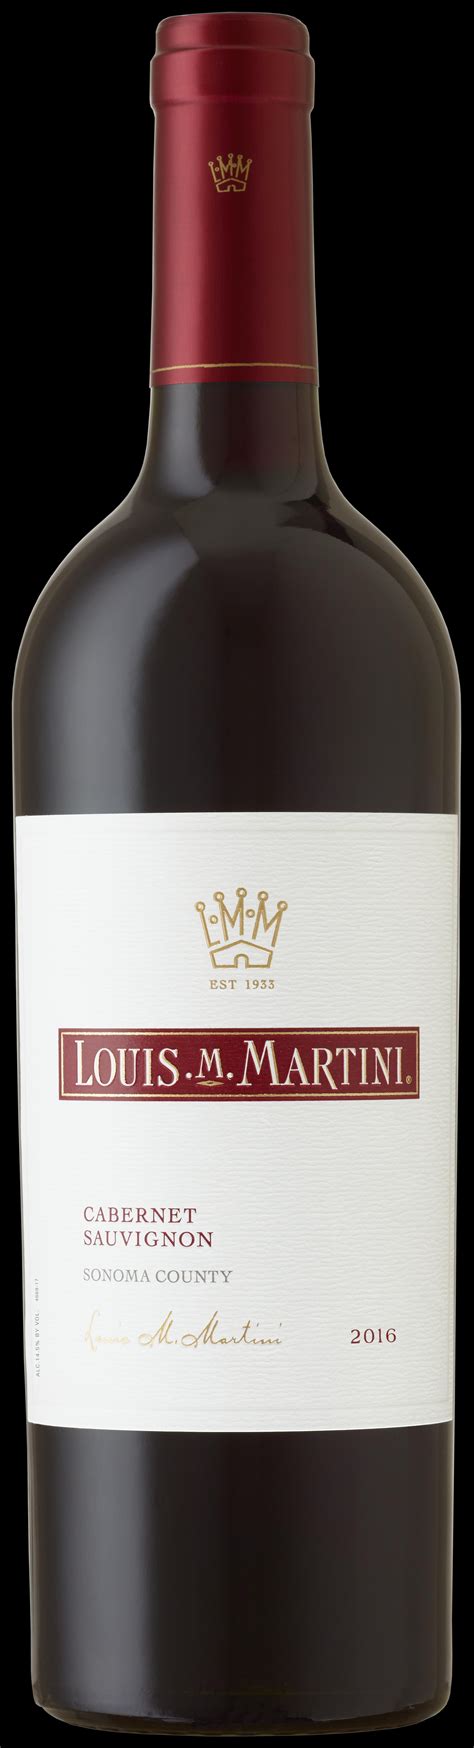 Louis m martini. Building on a legacy that began in 1933, the idea and commitment for Louis M. Martini Winery is straightforward: to make the best Cabernet Sauvignon possible.And with the crown jewel Monte Rosso, they have won wine lovers’ hearts all over the world. (Partner story with Louis M. Martini Winery) “Each wine is crafted to celebrate the terroir where it … 